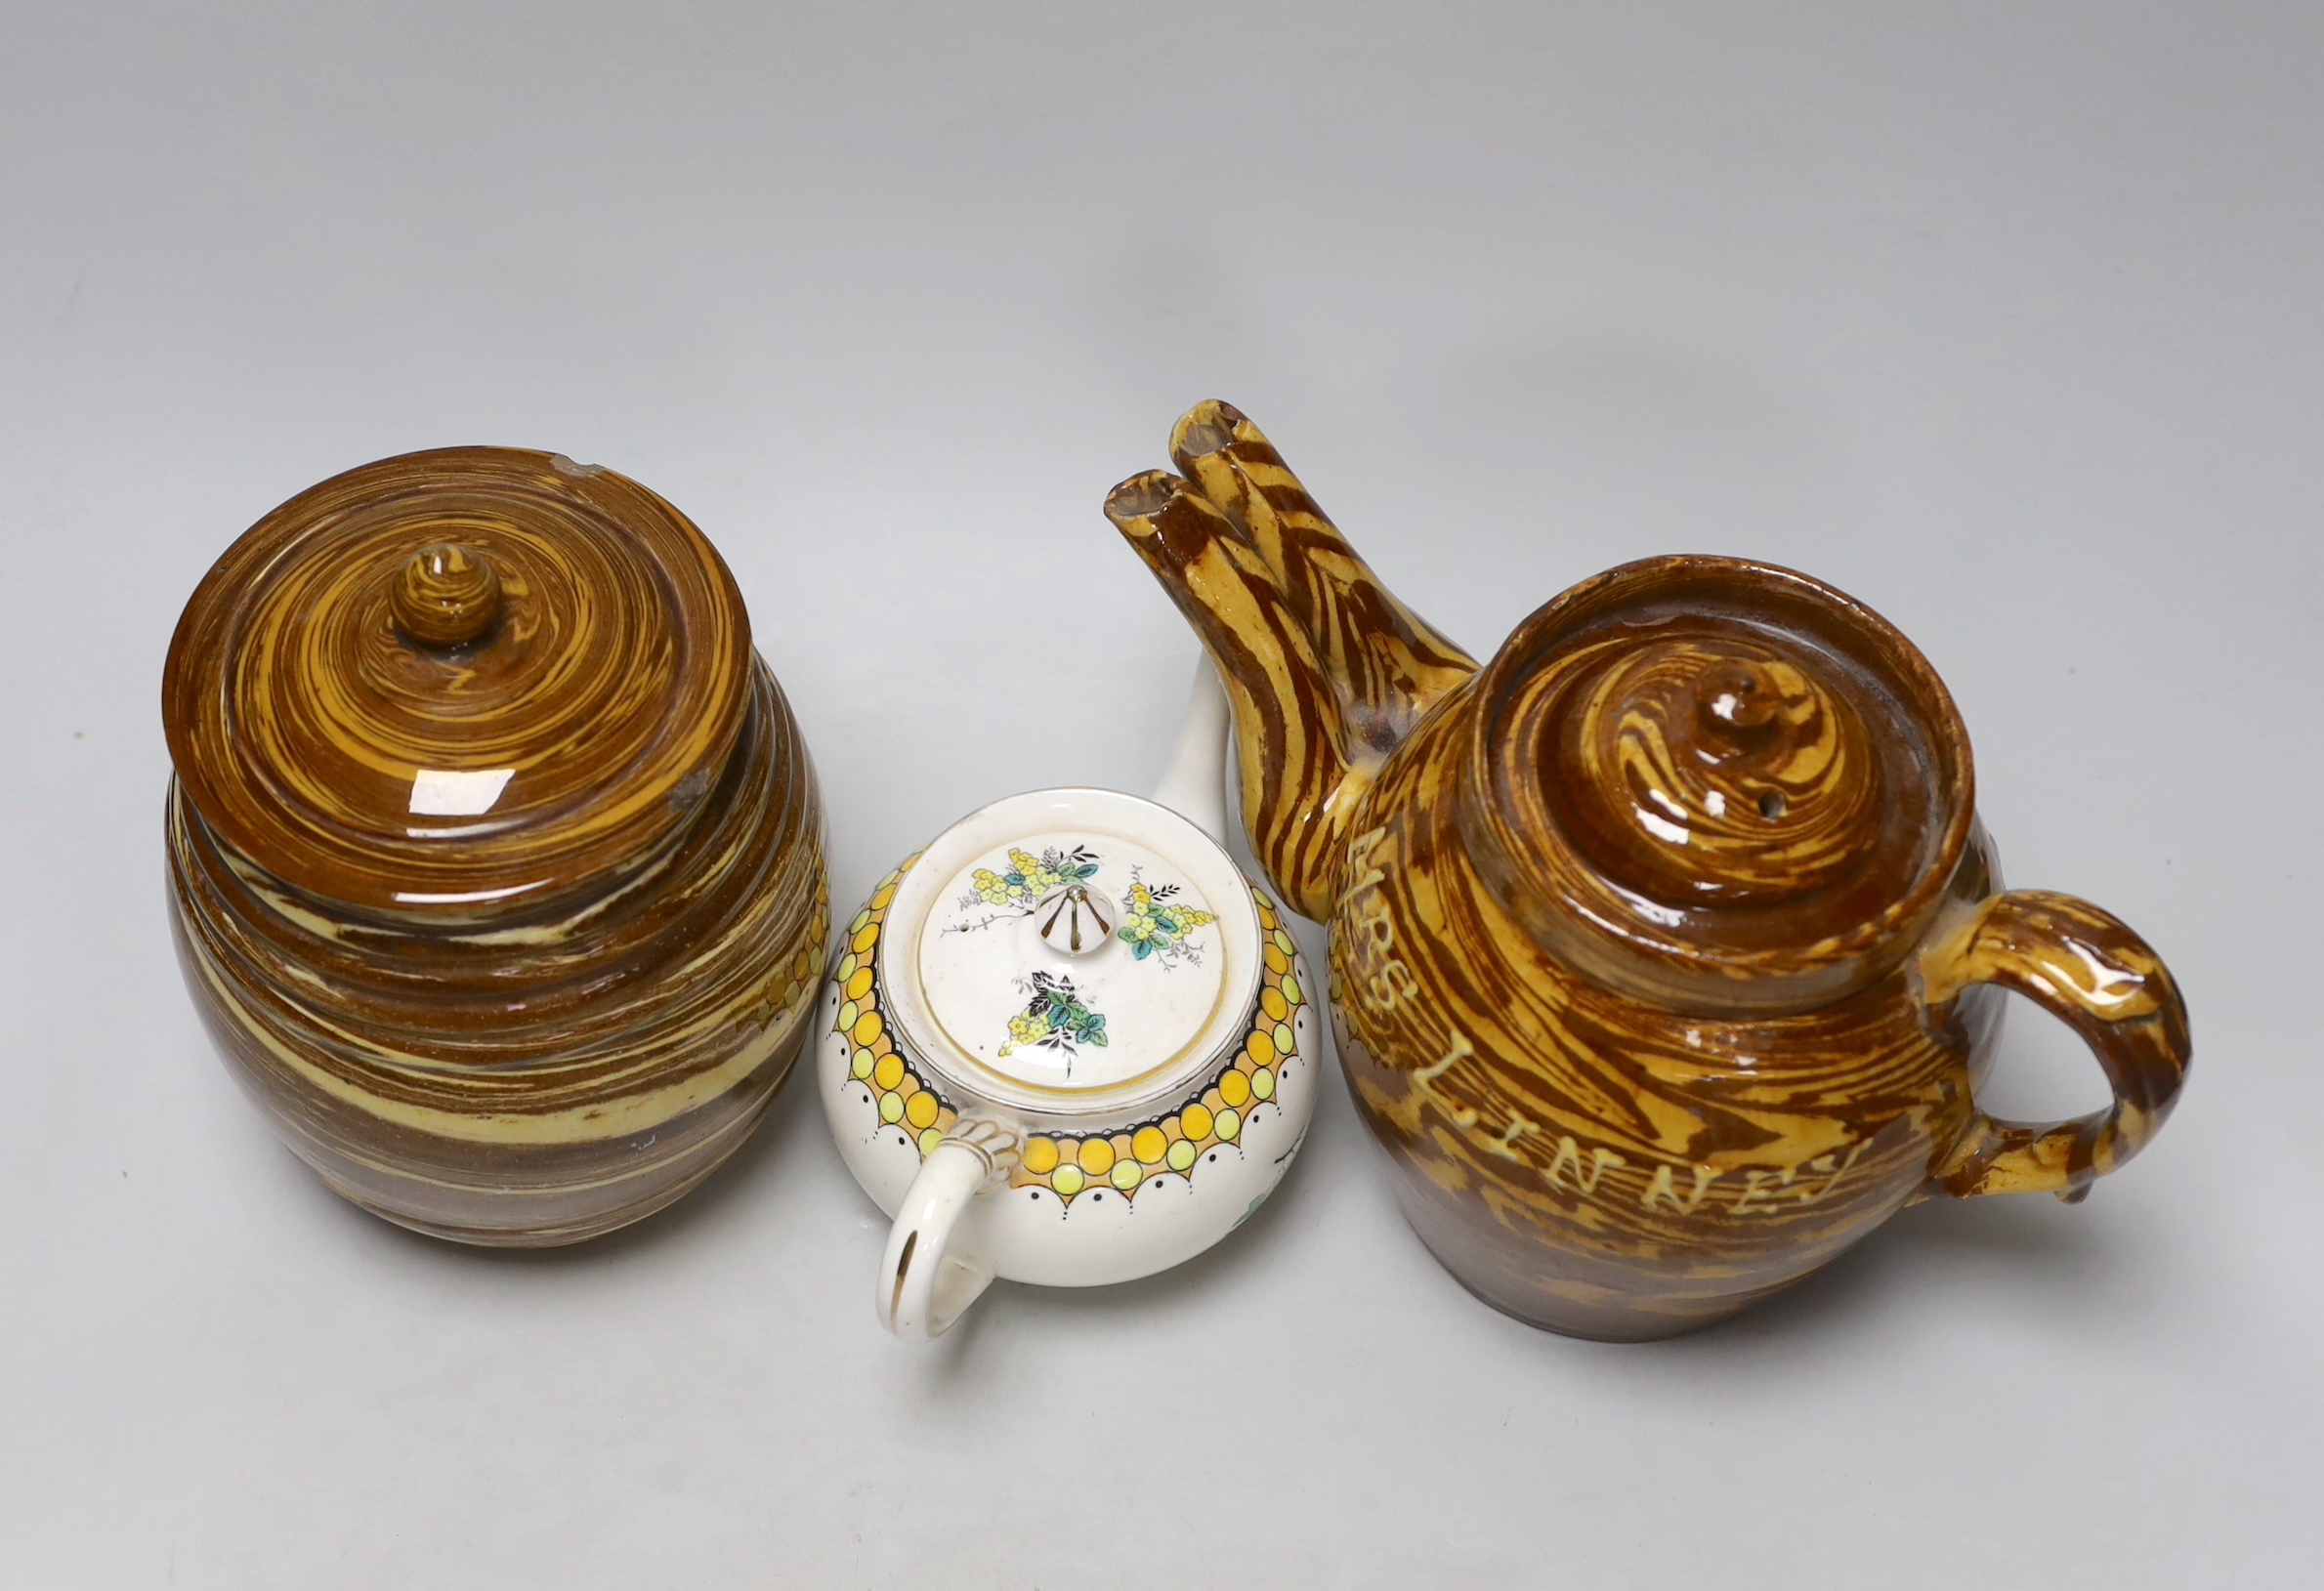 A late 19th century Scottish agate ware teapot and a sugar barrel and a Harrods Stella teapot, lidded pottery sugar jar dated 1888, the largest 20cm high